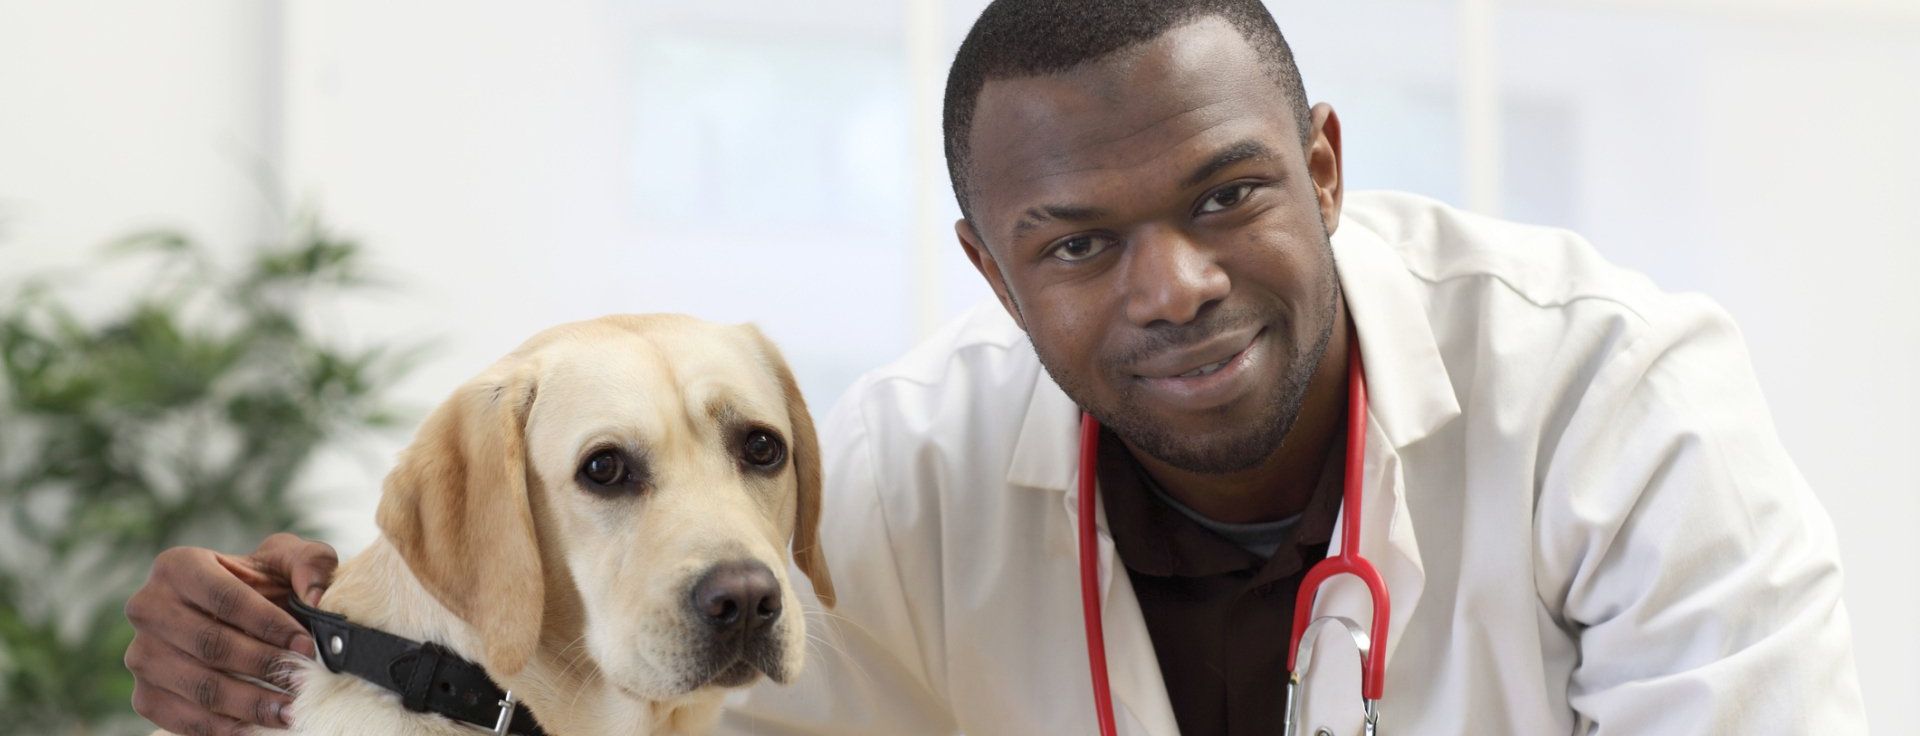 veterinary professionals - healthy canines